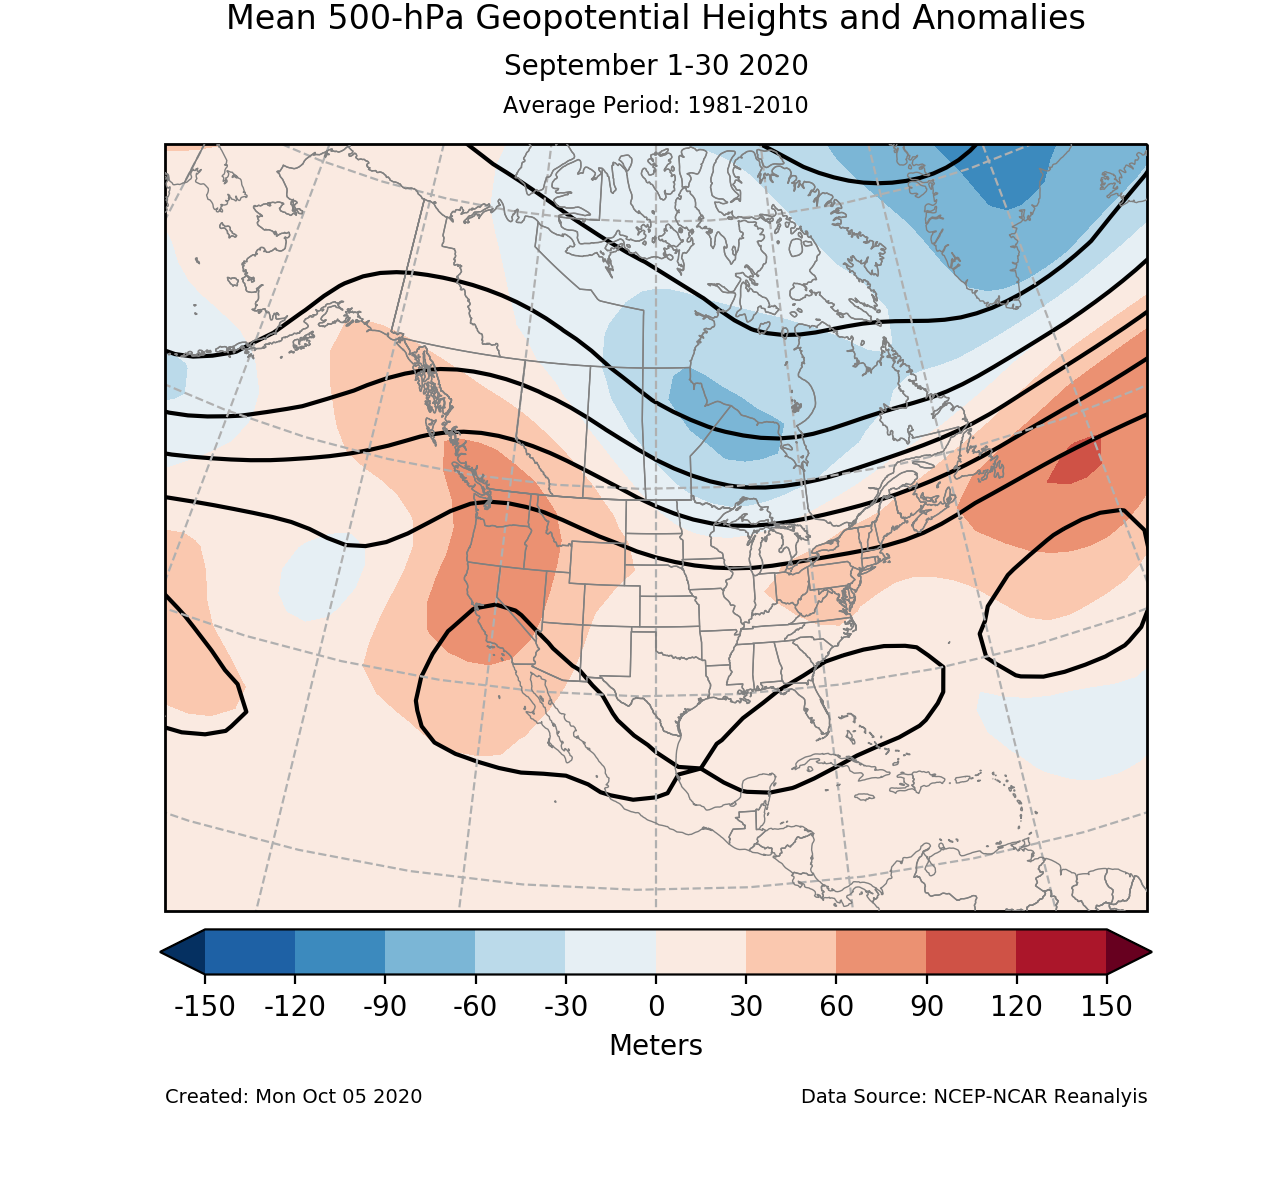 500-mb height mean (contours) and anomalies (shading) for North America for September 2020